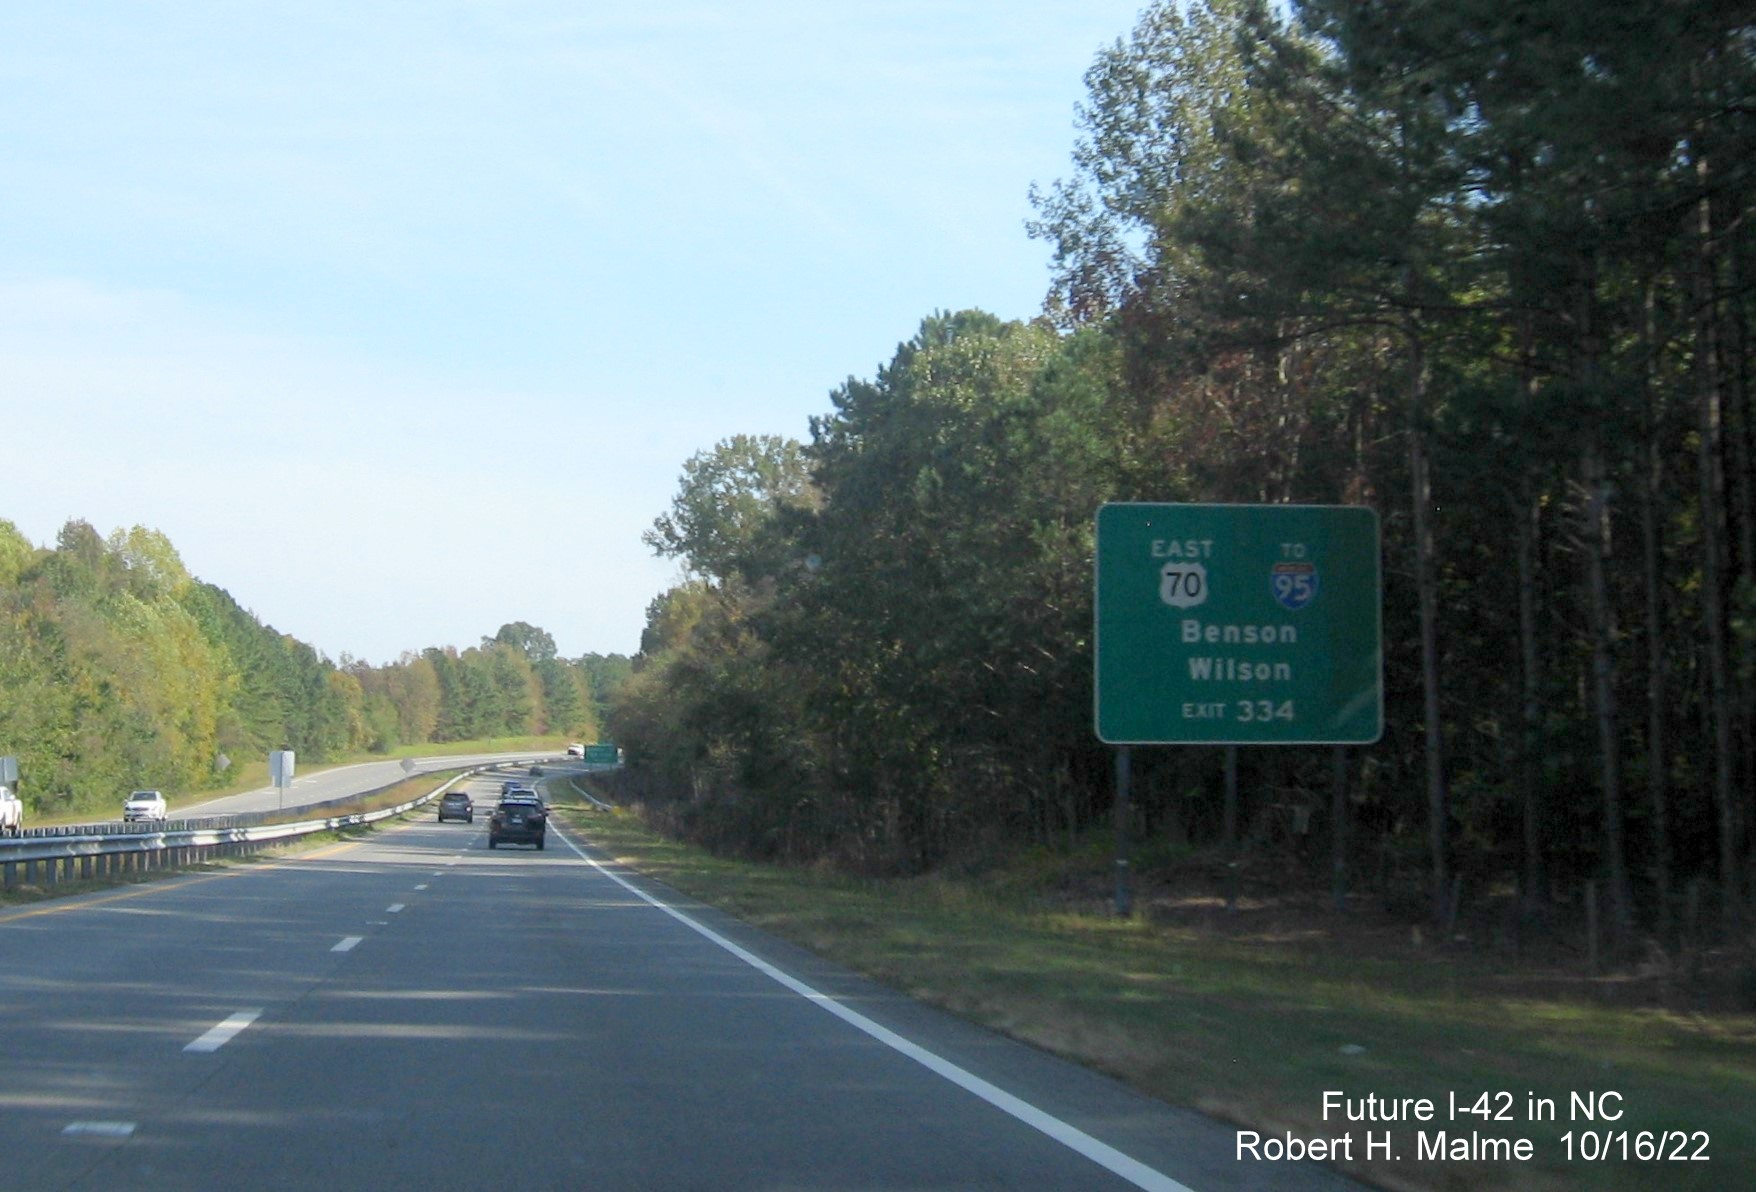 Image of ground mounted advance sign for East US 70 to I-95 exit on US 70 (Future I-42) East in Smithfield, October 2022